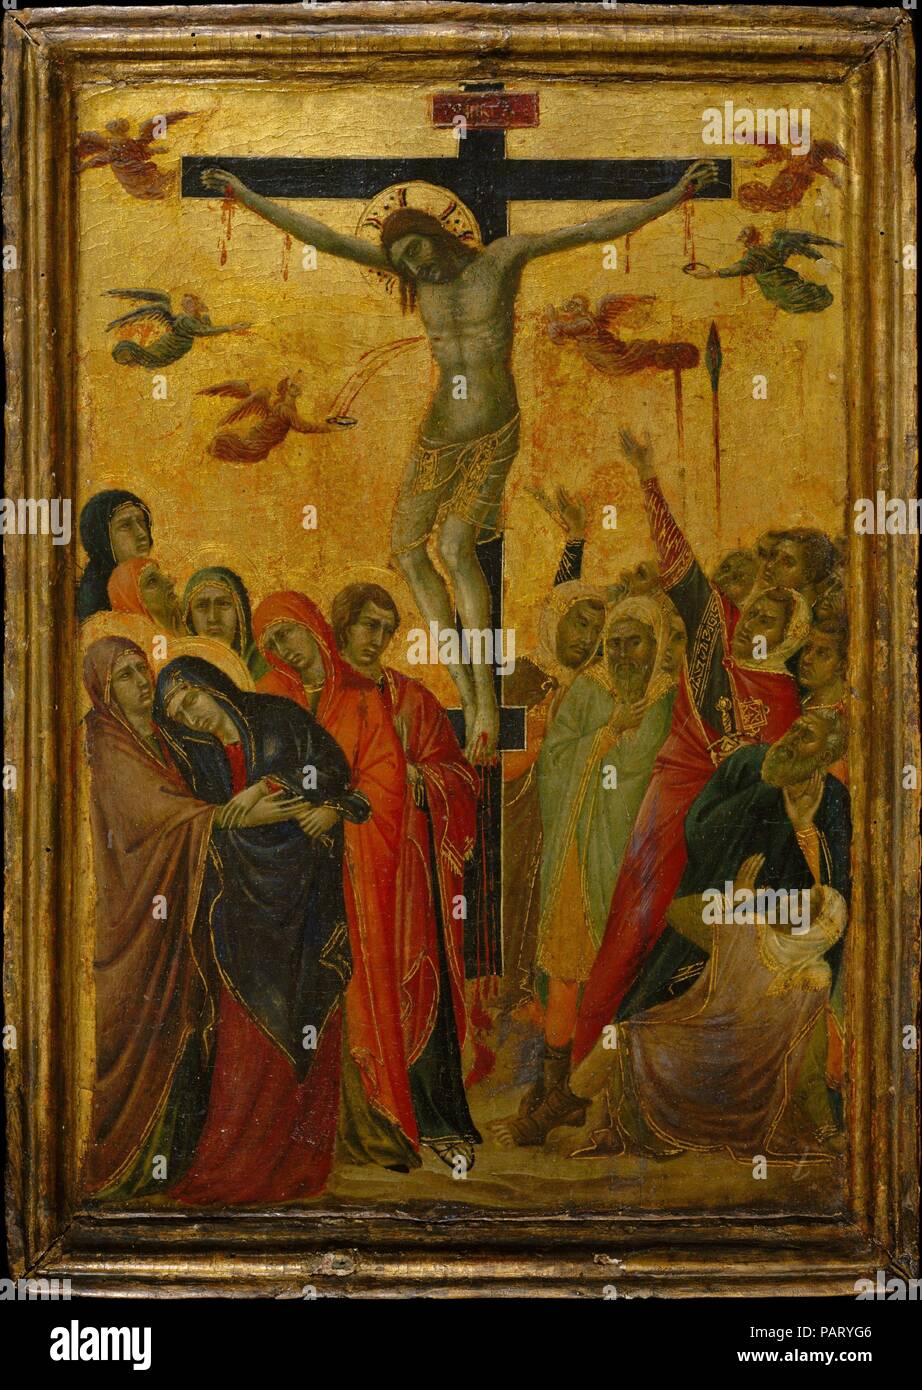 The Crucifixion. Artist: Segna di Buonaventura (Italian, active Siena by 1298-died 1326/31). Dimensions: Left wing, overall, with engaged frame, 15 1/8 x 10 5/8 in. (38.4 x 27 cm); right wing, overall, with engaged frame, 15 x 10 5/8 in. (38.1 x 27 cm). Date: ca. 1315.  This panel and another in the Lehman Collection portraying the Madonna and Child (1975.1.1) formed a diptych (two panels hinged together so they could open and close) and would have been used for private devotion. The radiant beauty of the Virgin's court, enhanced by the ornamental detail, contrasts with the tragic drama of the Stock Photo